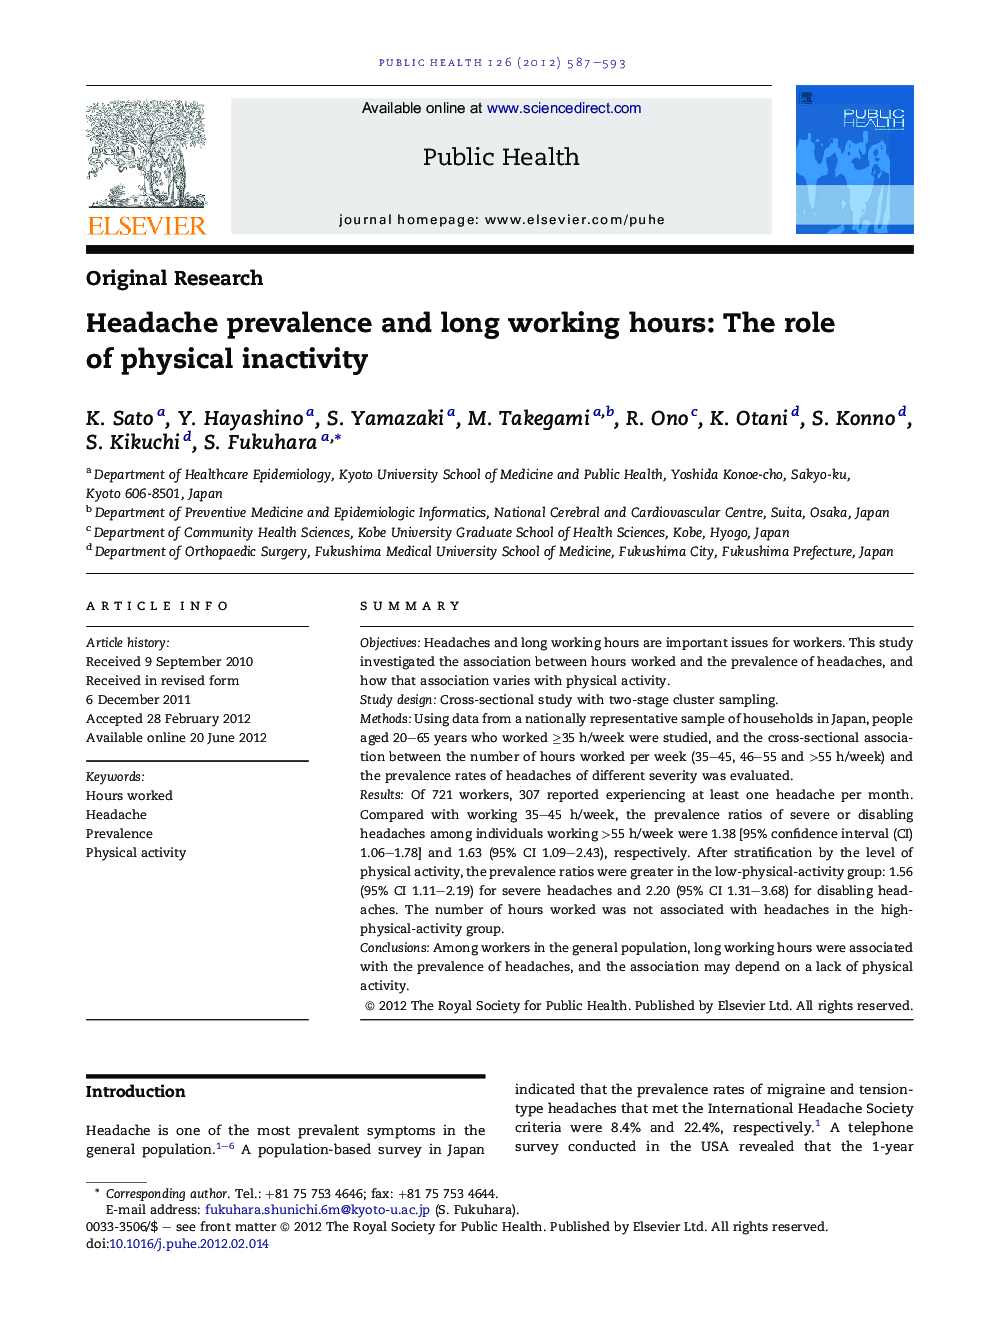 Headache prevalence and long working hours: The role of physical inactivity